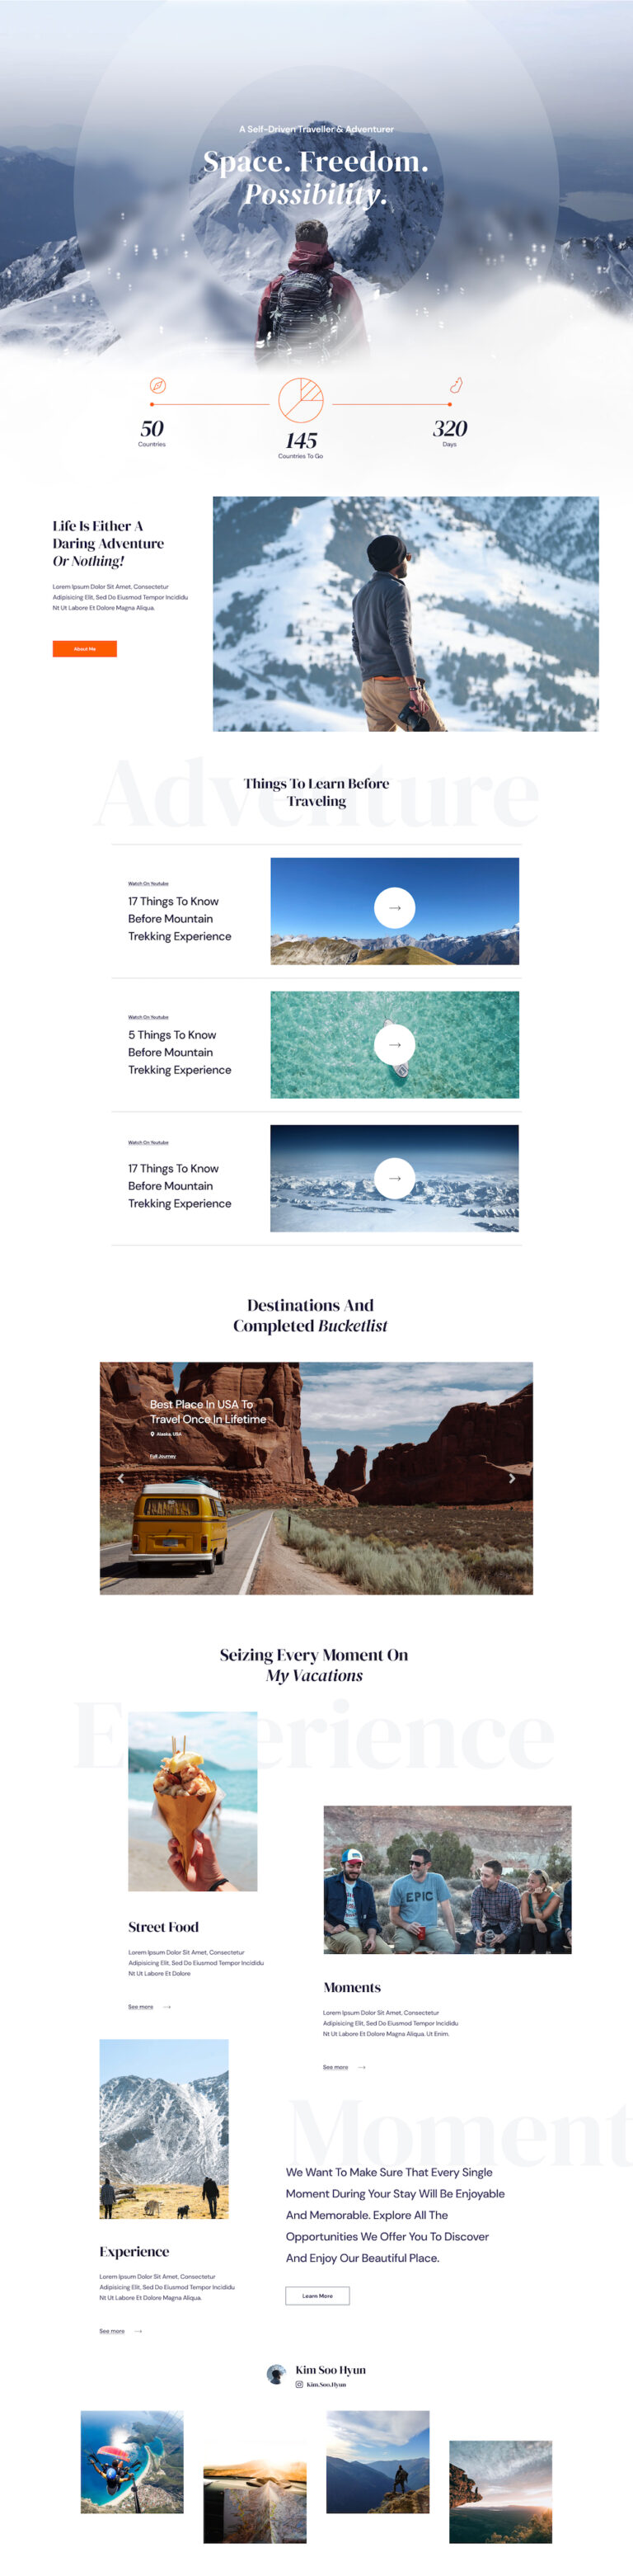 introducing-wanderlust-a-free-layout-bundle-for-sp-page-builder-pro